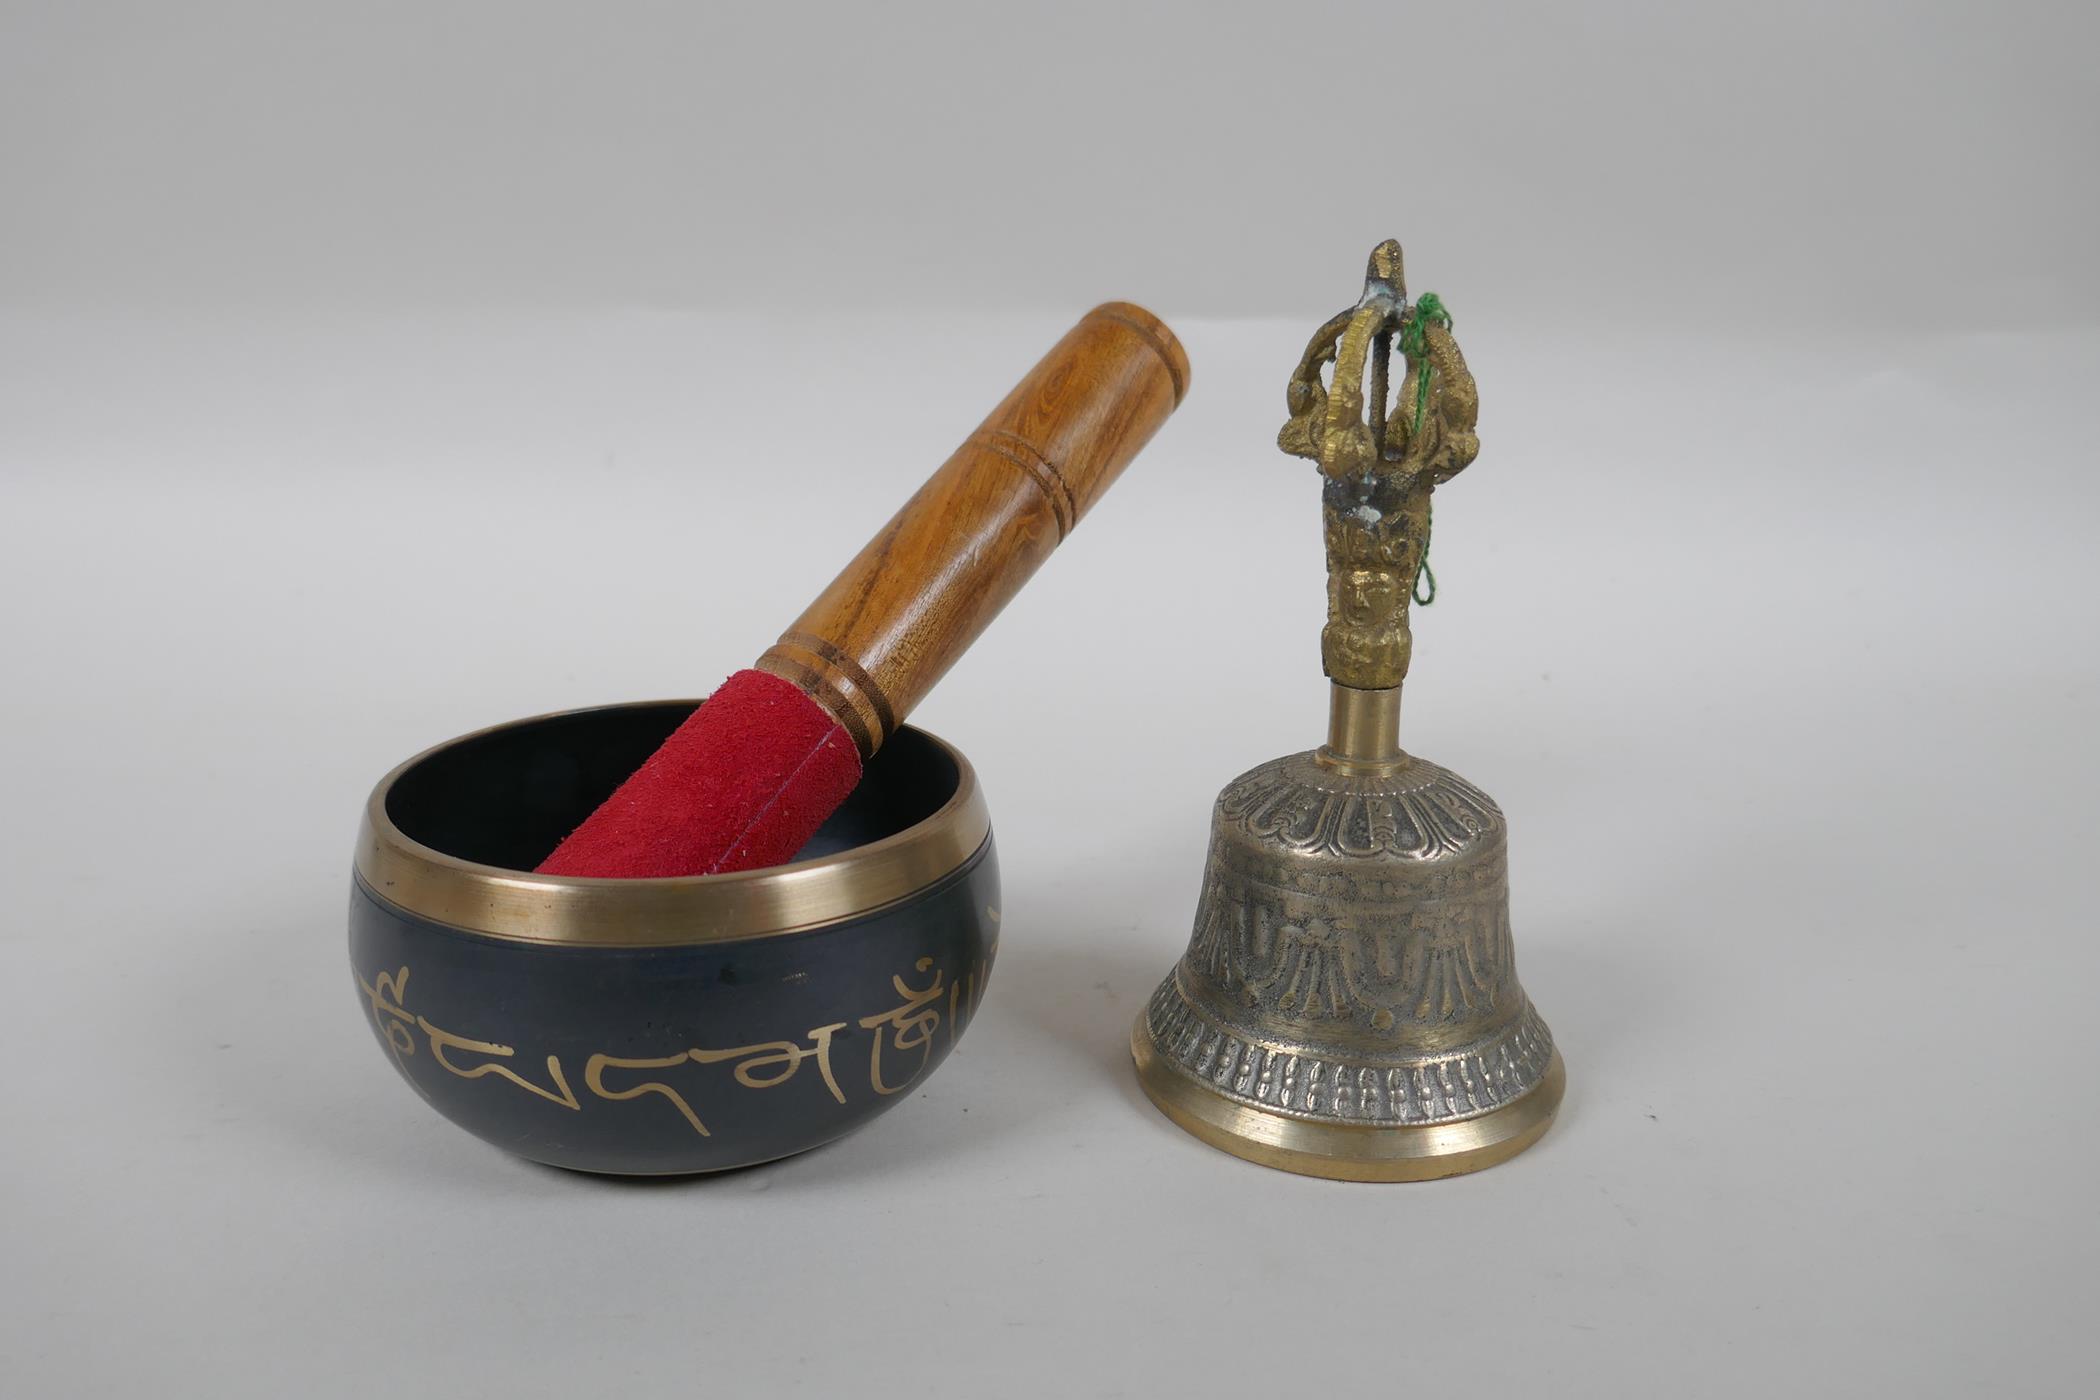 A Tibetan bronze singing bowl and beater with script decoration, a brass ceremonial bell with